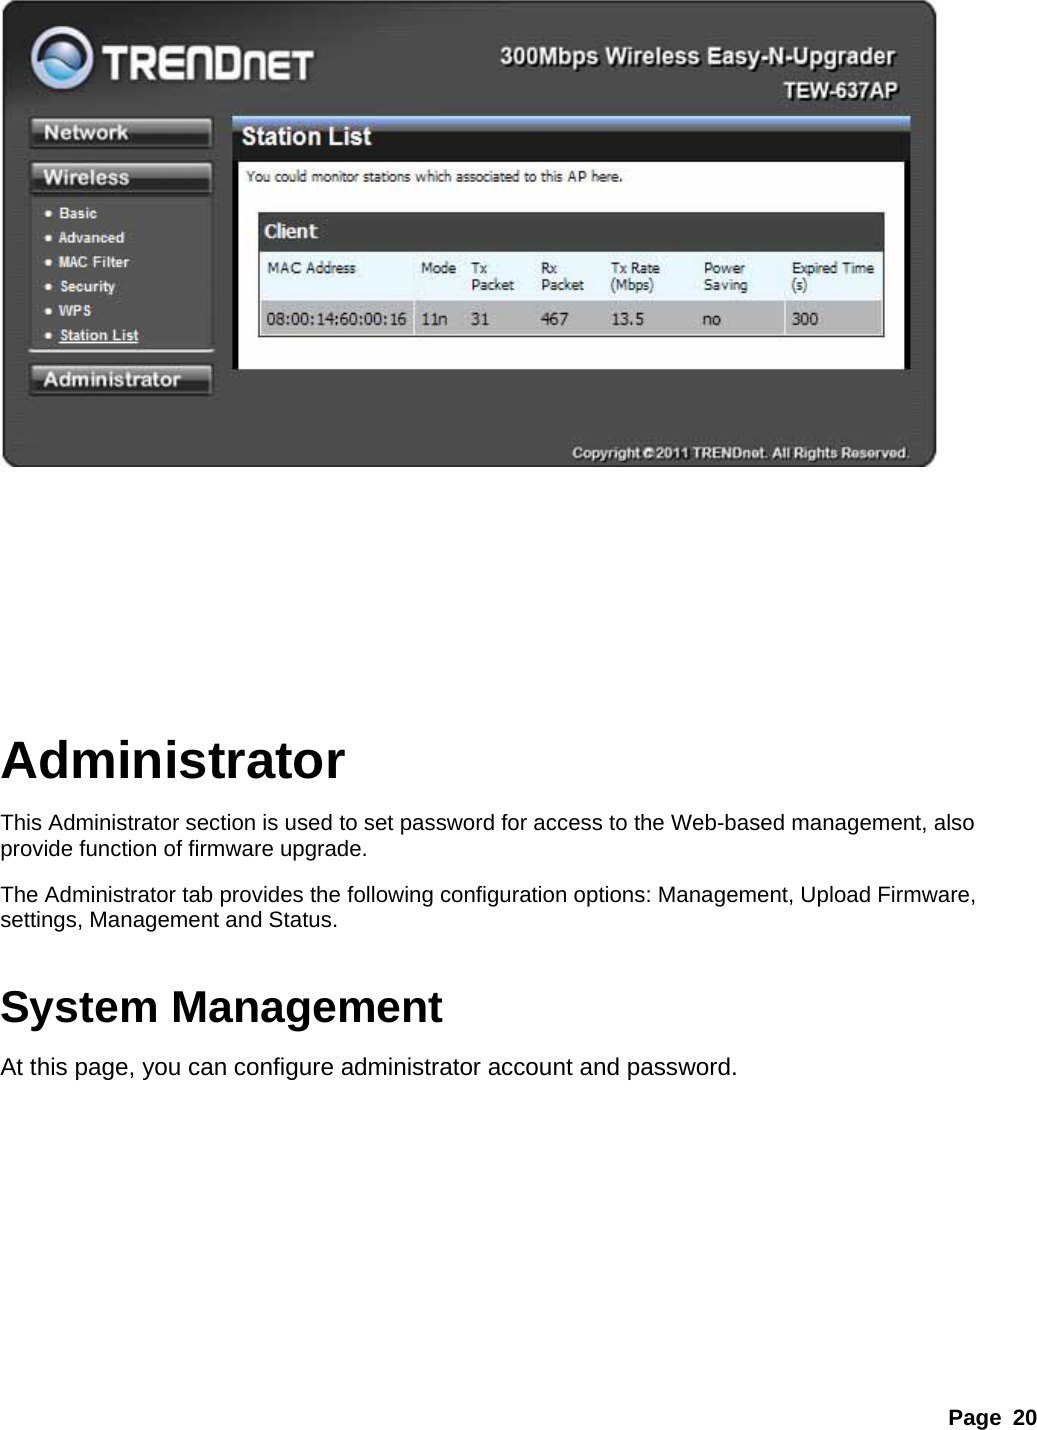 Page 20     Administrator This Administrator section is used to set password for access to the Web-based management, also provide function of firmware upgrade. The Administrator tab provides the following configuration options: Management, Upload Firmware, settings, Management and Status.    System Management At this page, you can configure administrator account and password. 